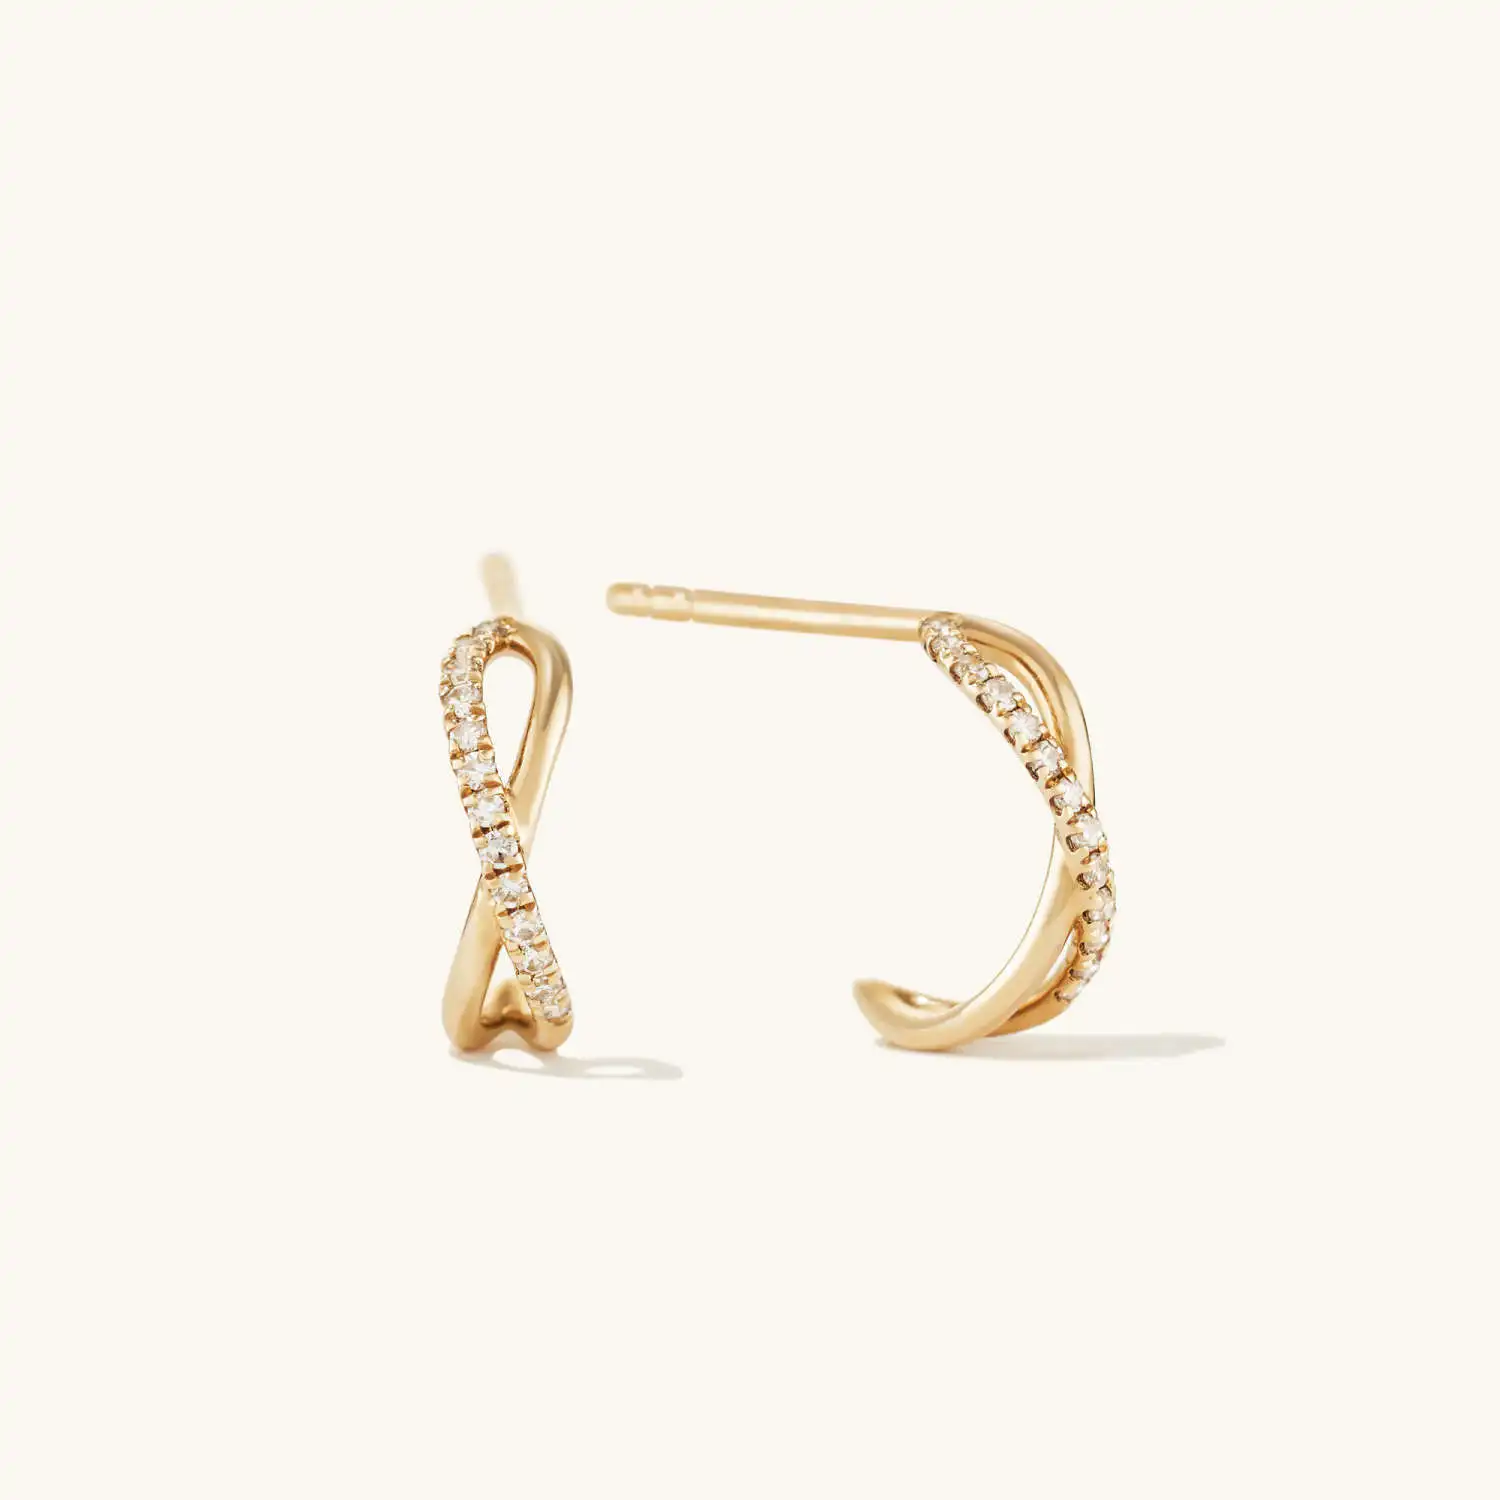 

2021 new trend earrings Hoop ear studs fashion design inlaid cubic zirconia S925 sterling silver 14k gold plated woman earrings